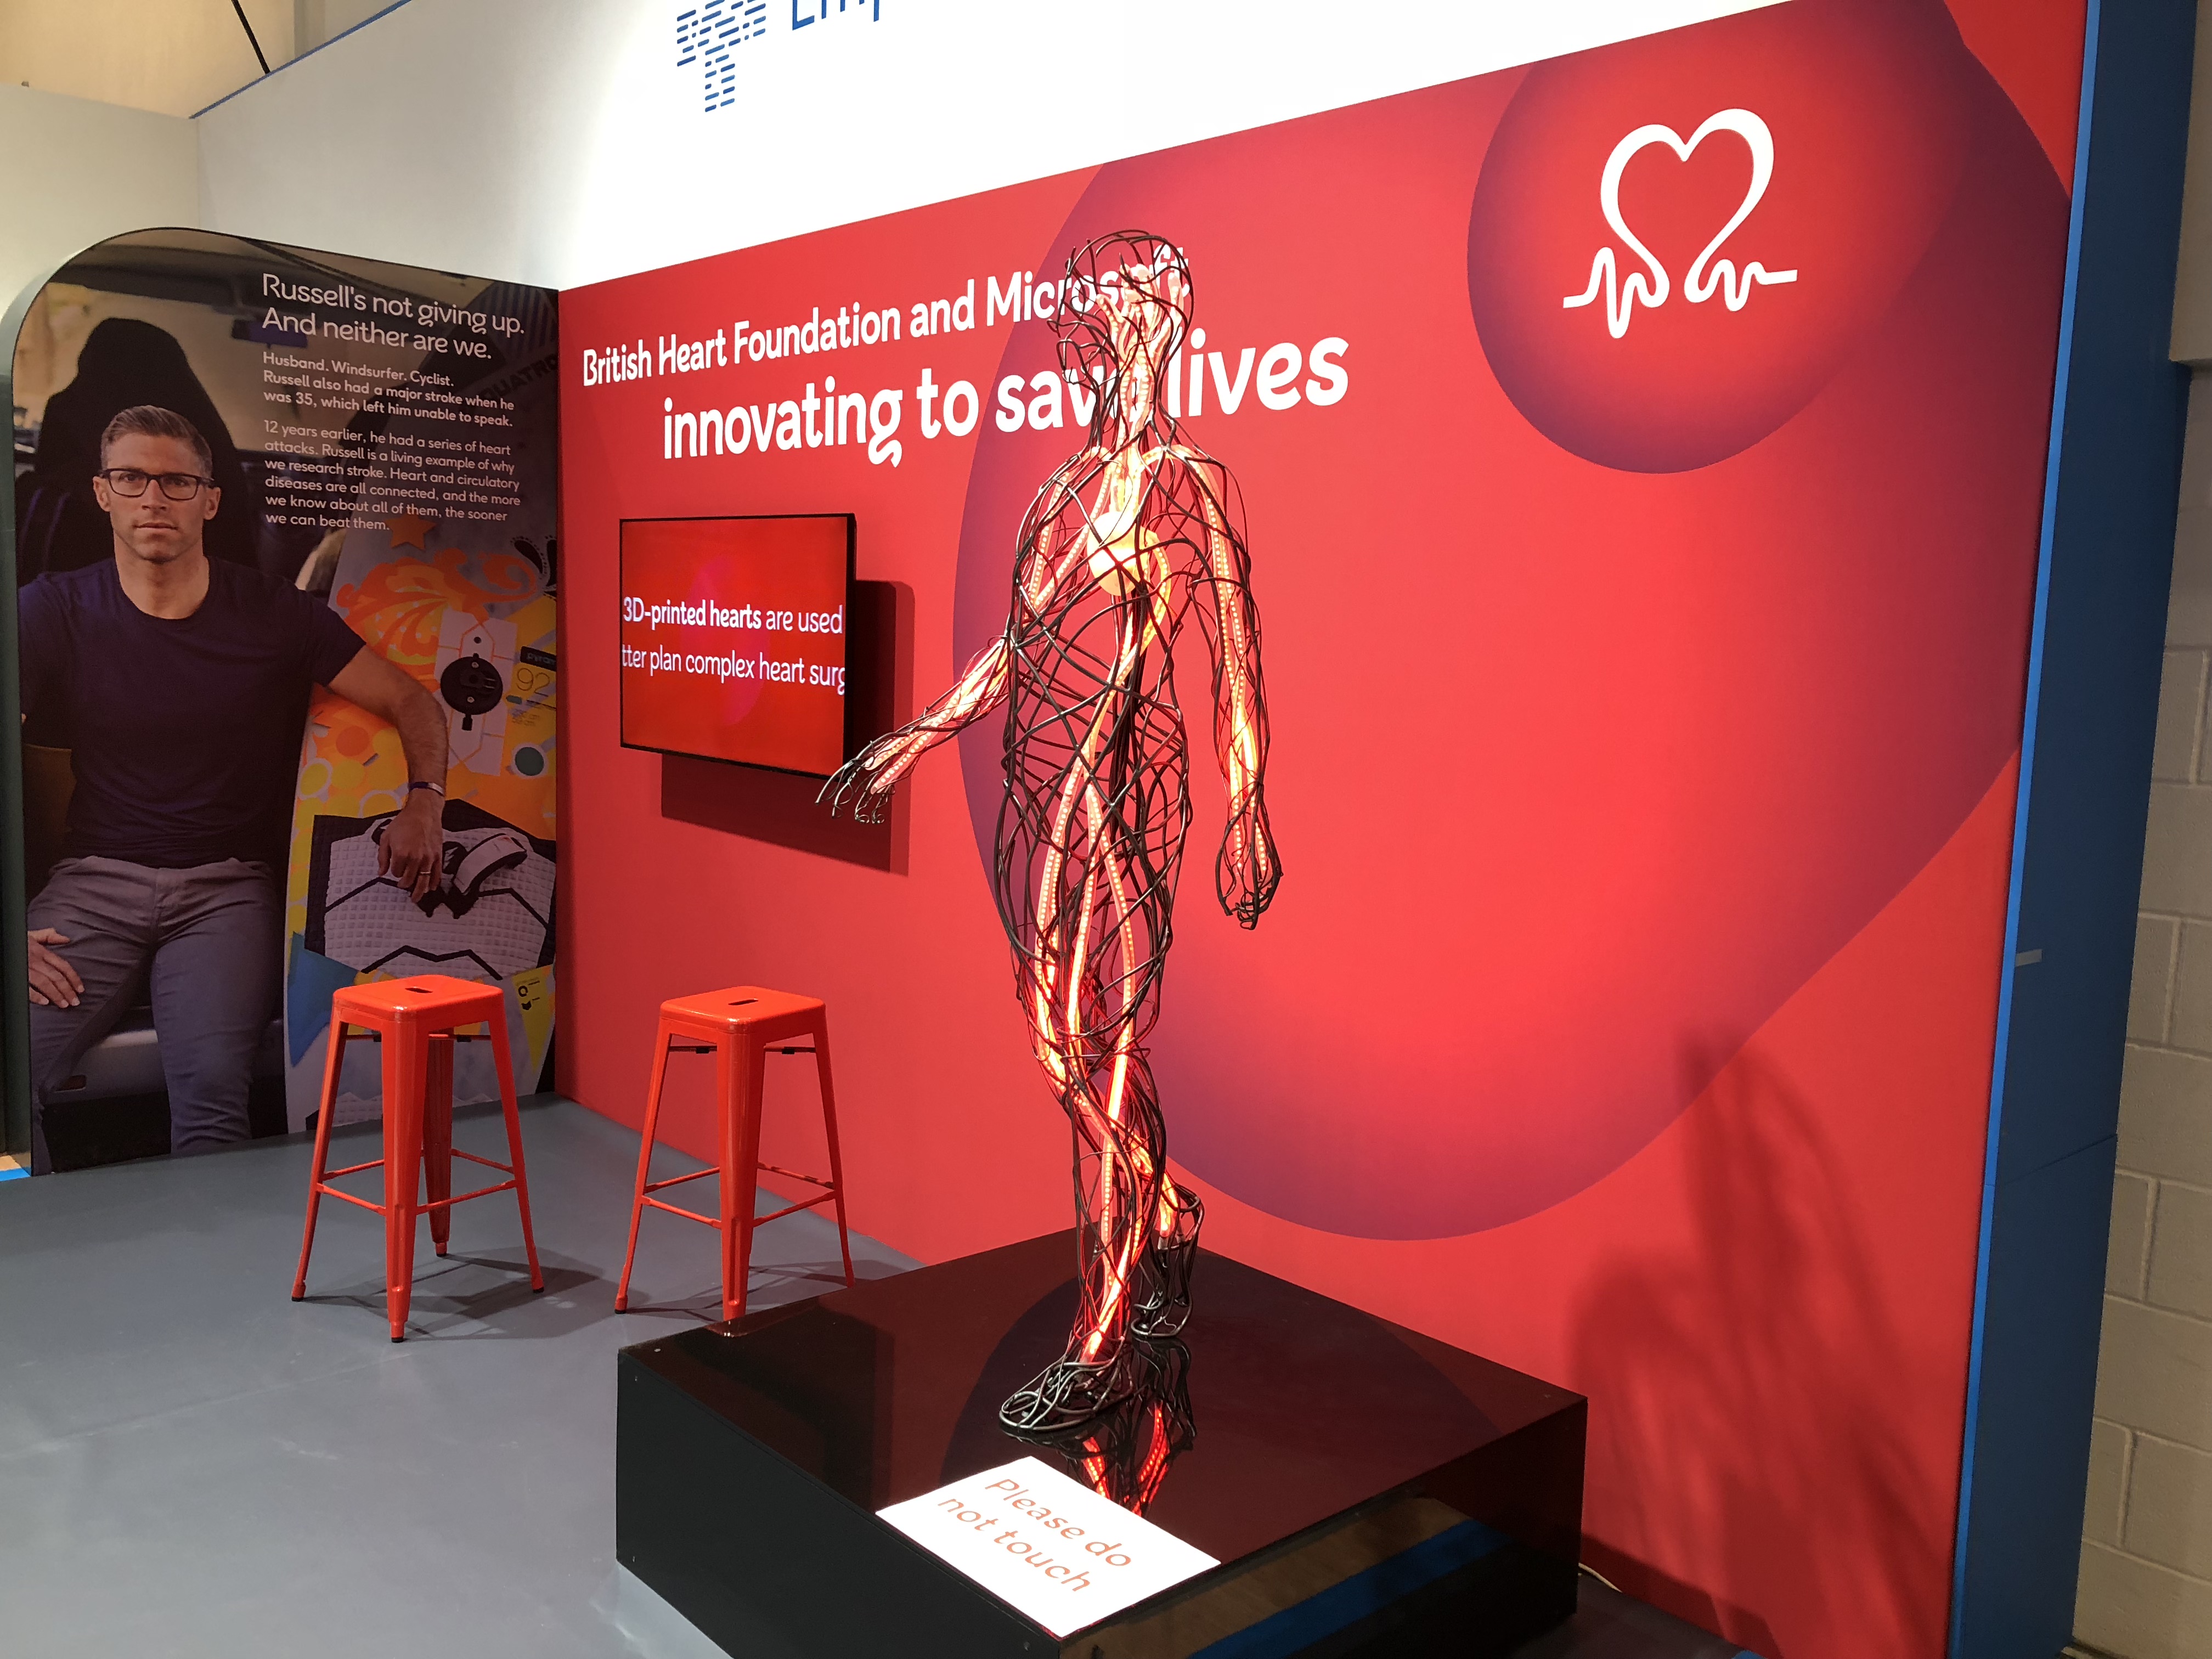 Microsoft is working with the British Heart Foundation to help save lives